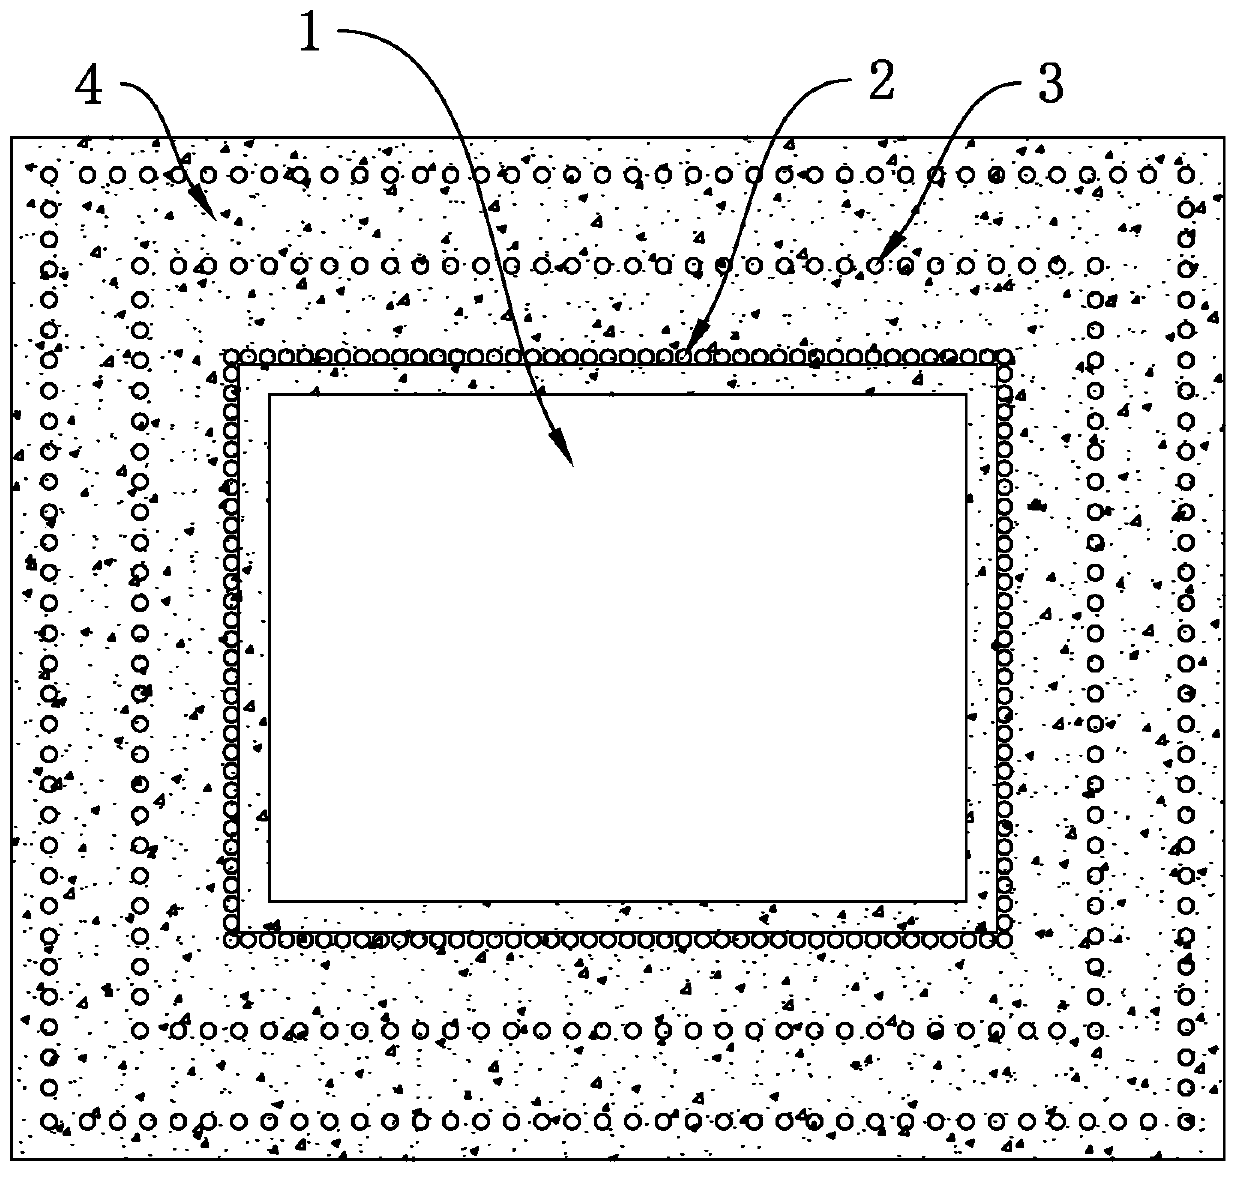 Construction method for ultra-deep foundation pit non-drainage earth excavation